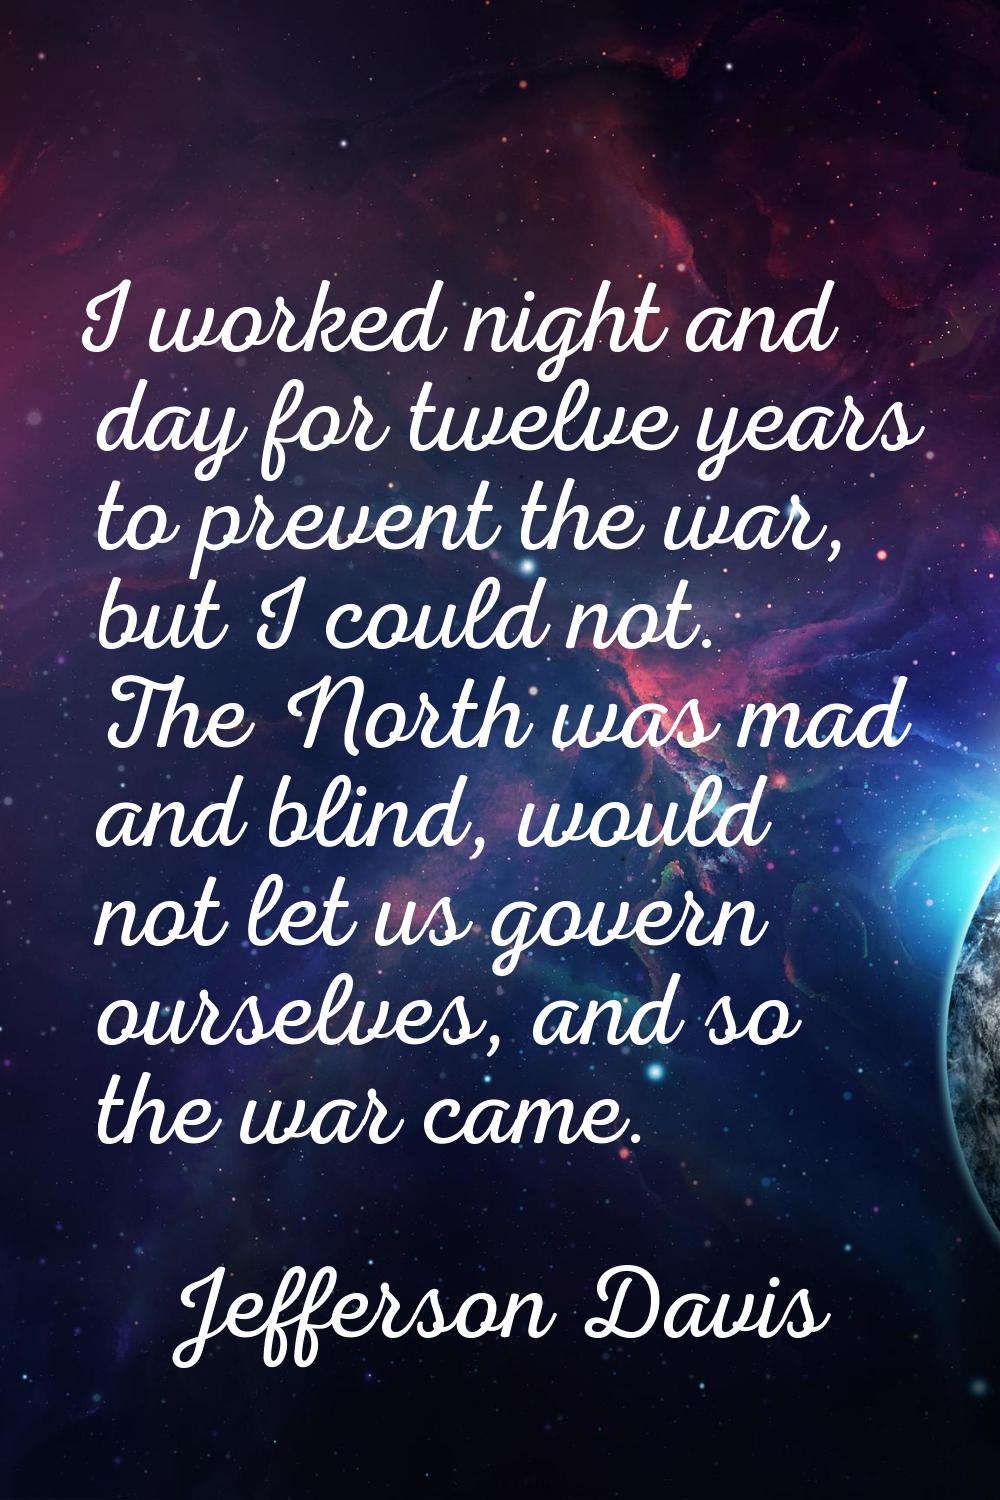 I worked night and day for twelve years to prevent the war, but I could not. The North was mad and 